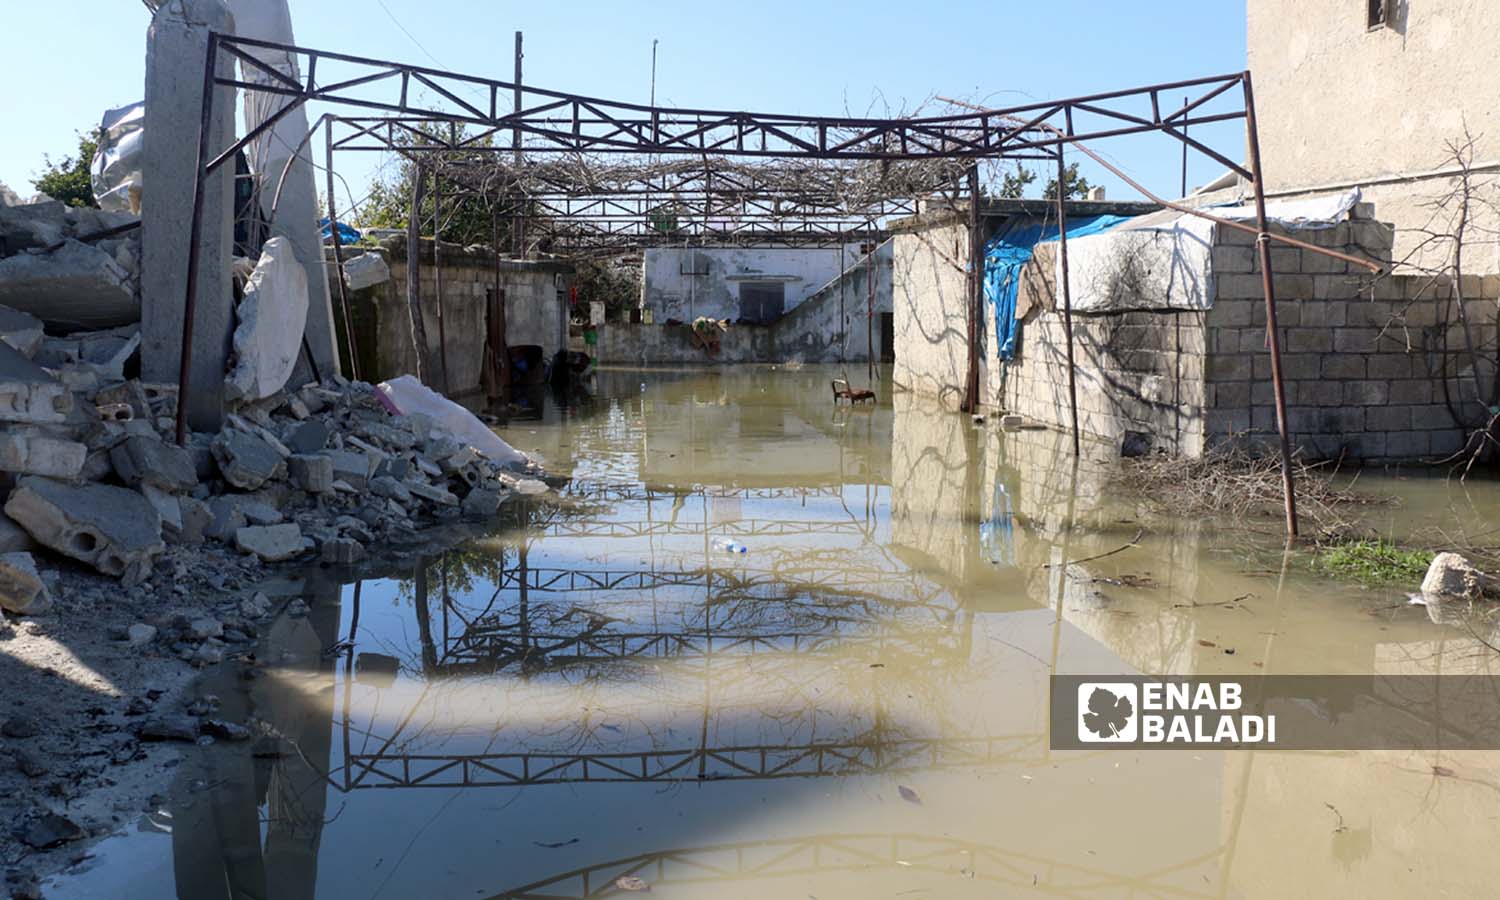 The waters of the Orontes (Asi) River flood many houses in the village of al-Talul near the city of Salqin - February 9, 2023 (Enab Baladi/Iyad Abdul Jawad)